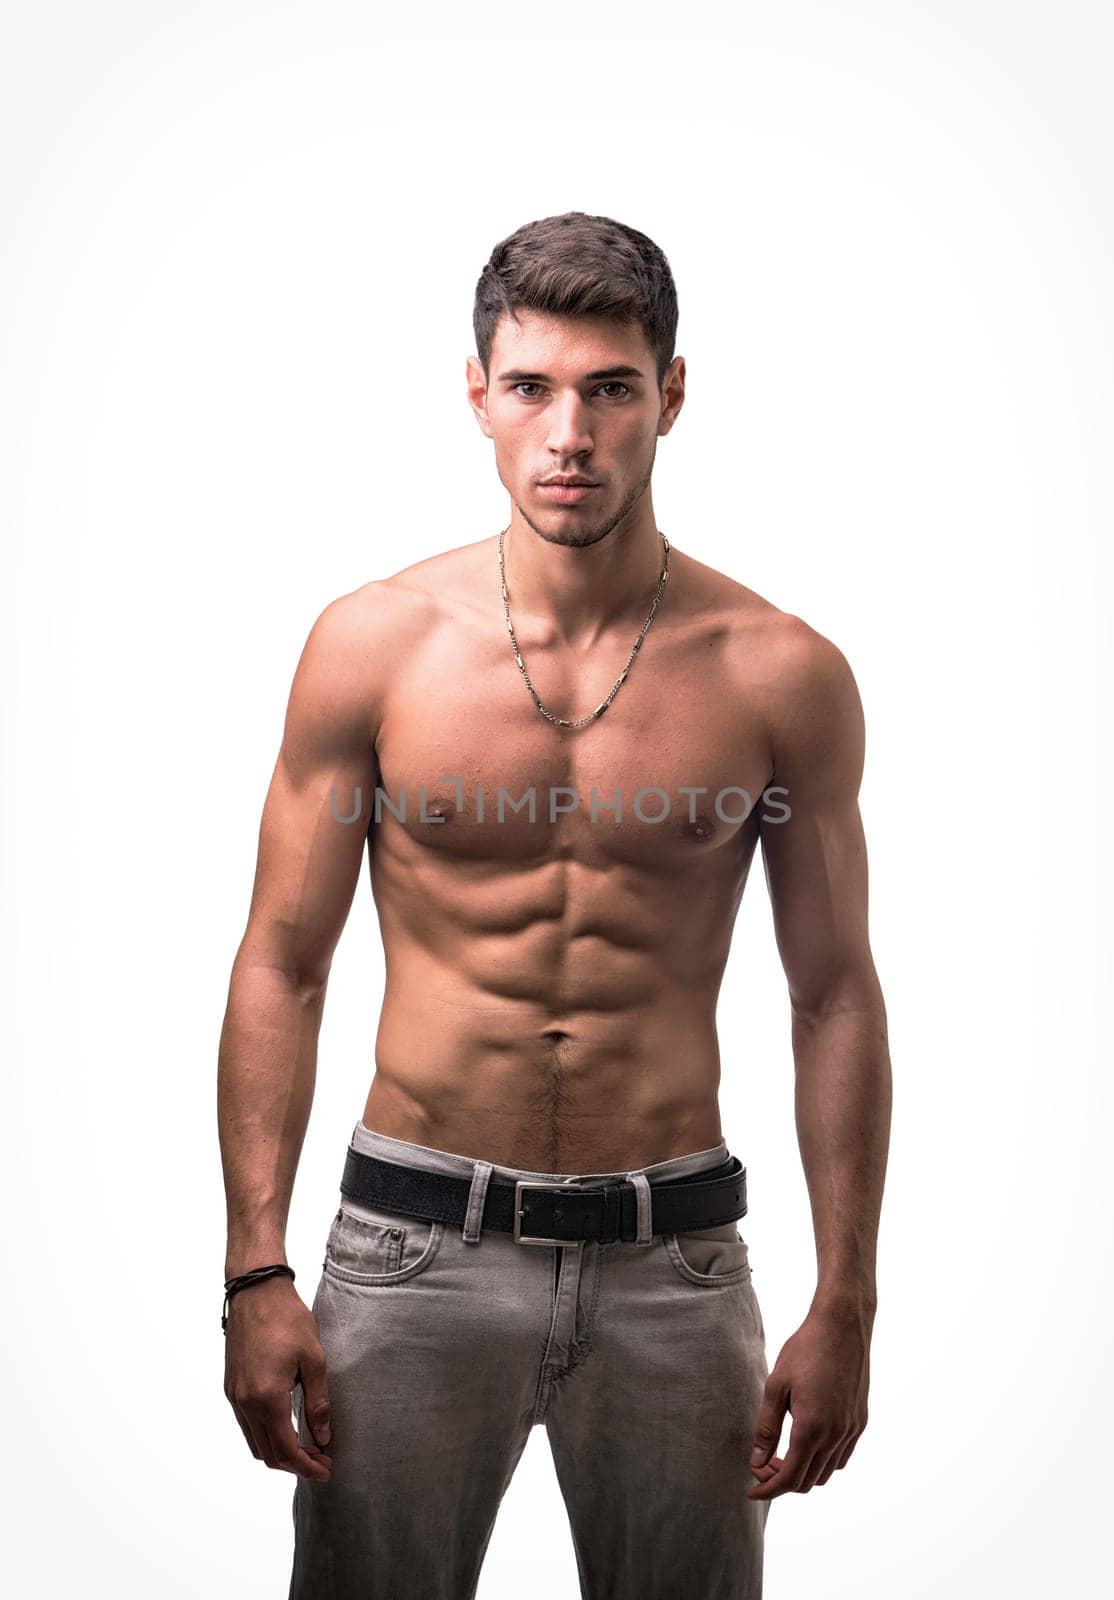 Photo of a muscular man striking a confident pose shirtless by artofphoto